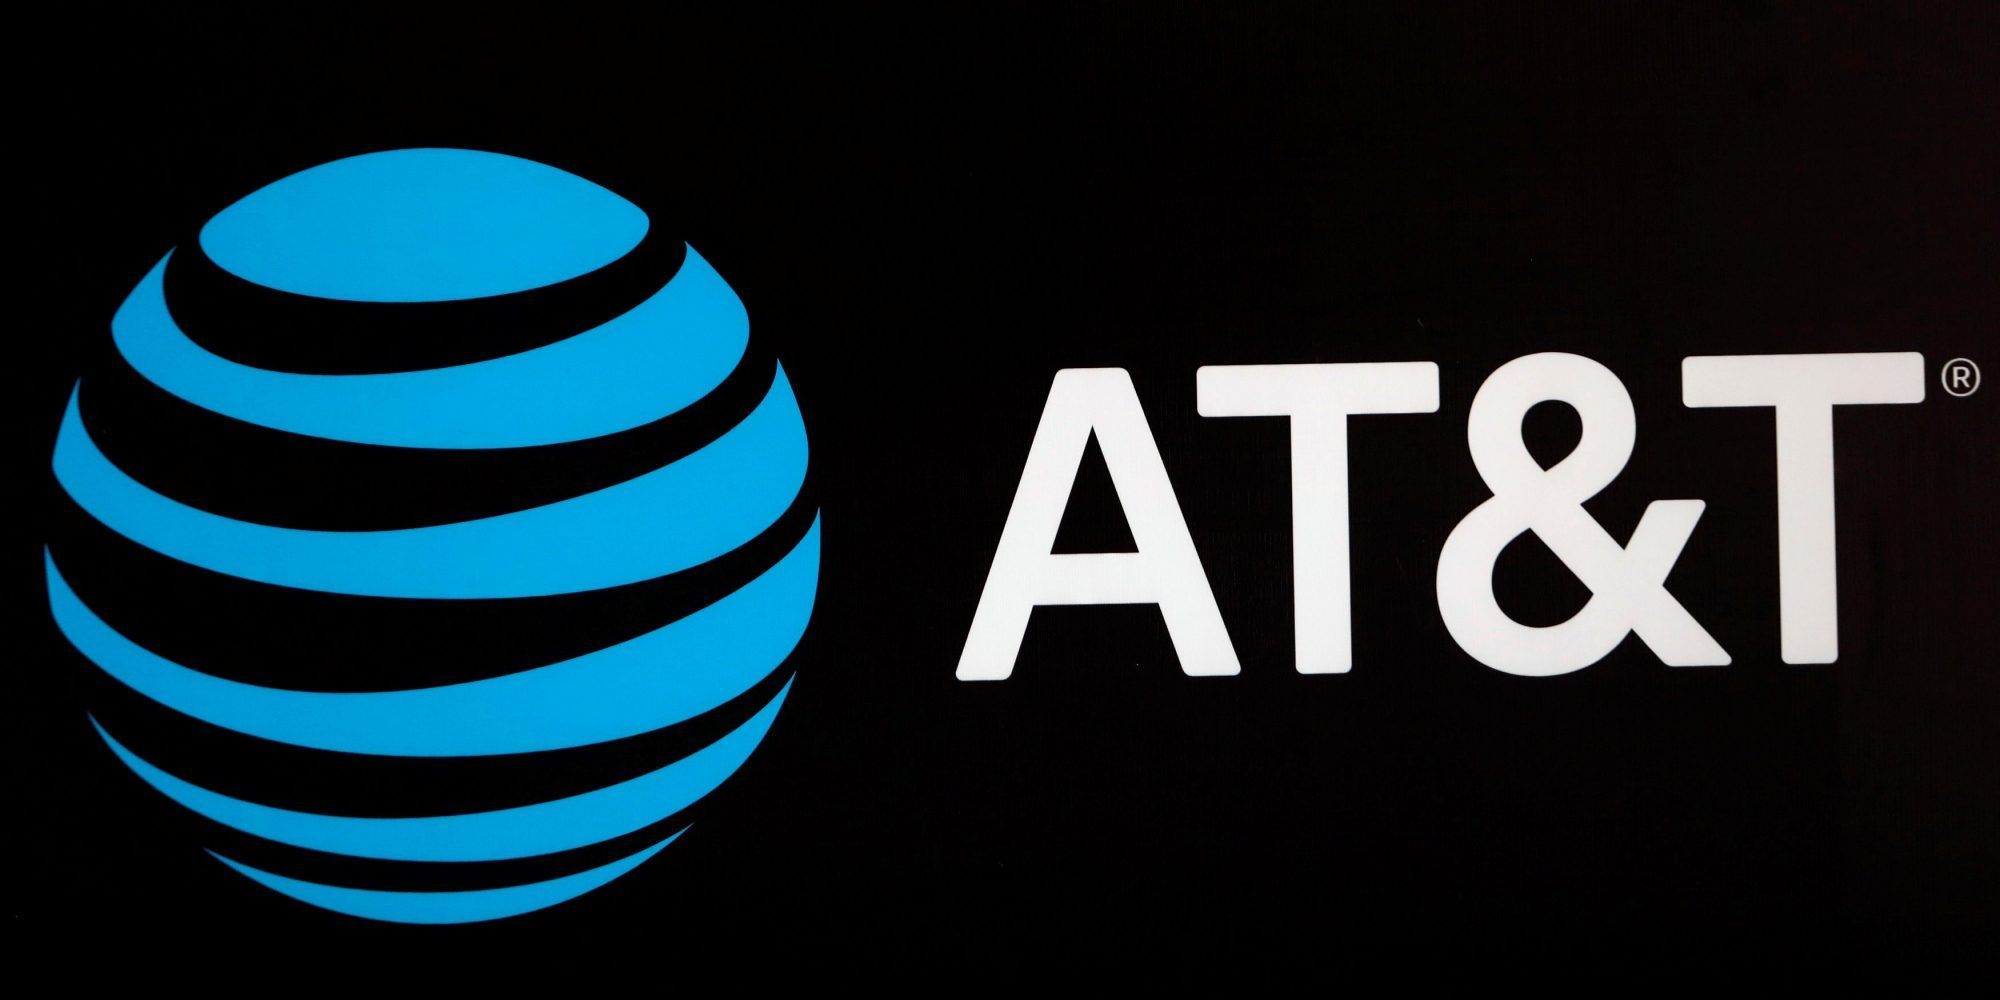 AT&T added 25,000 5G home Internet customers in just over a month  News of cutting the umbilical cord